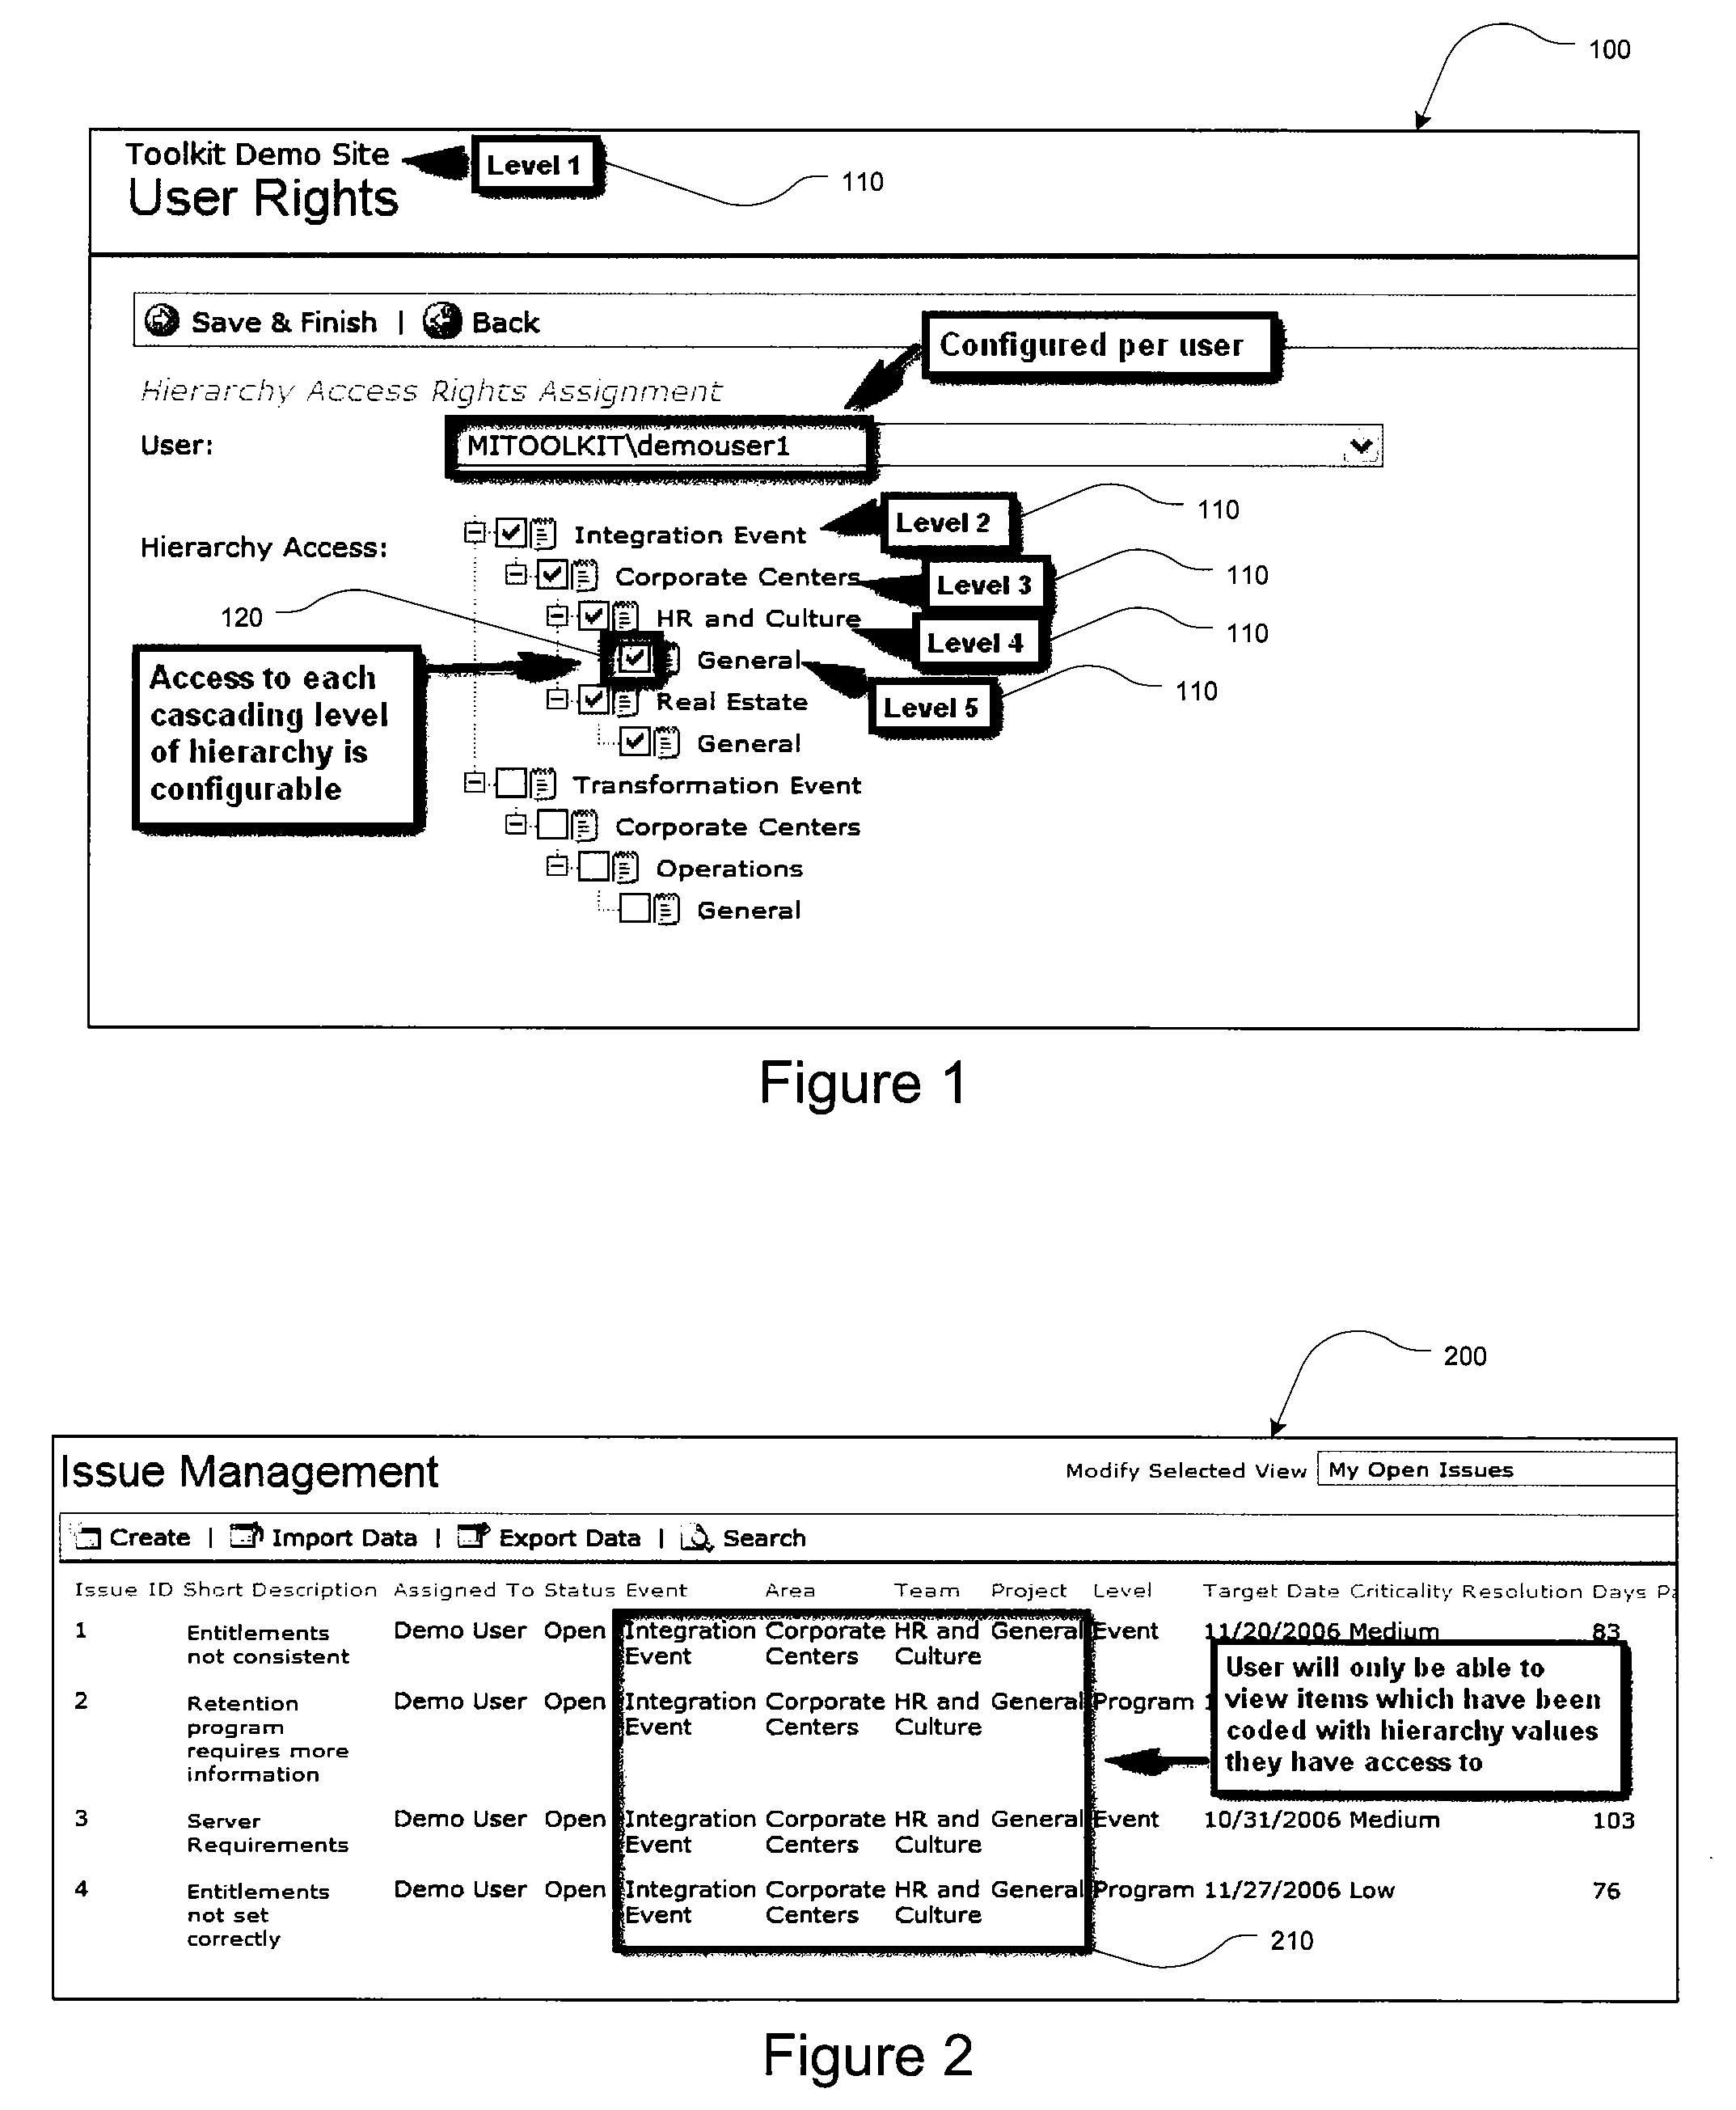 Merger integration toolkit system and method for secure navigation hierarchy and workflow functionality